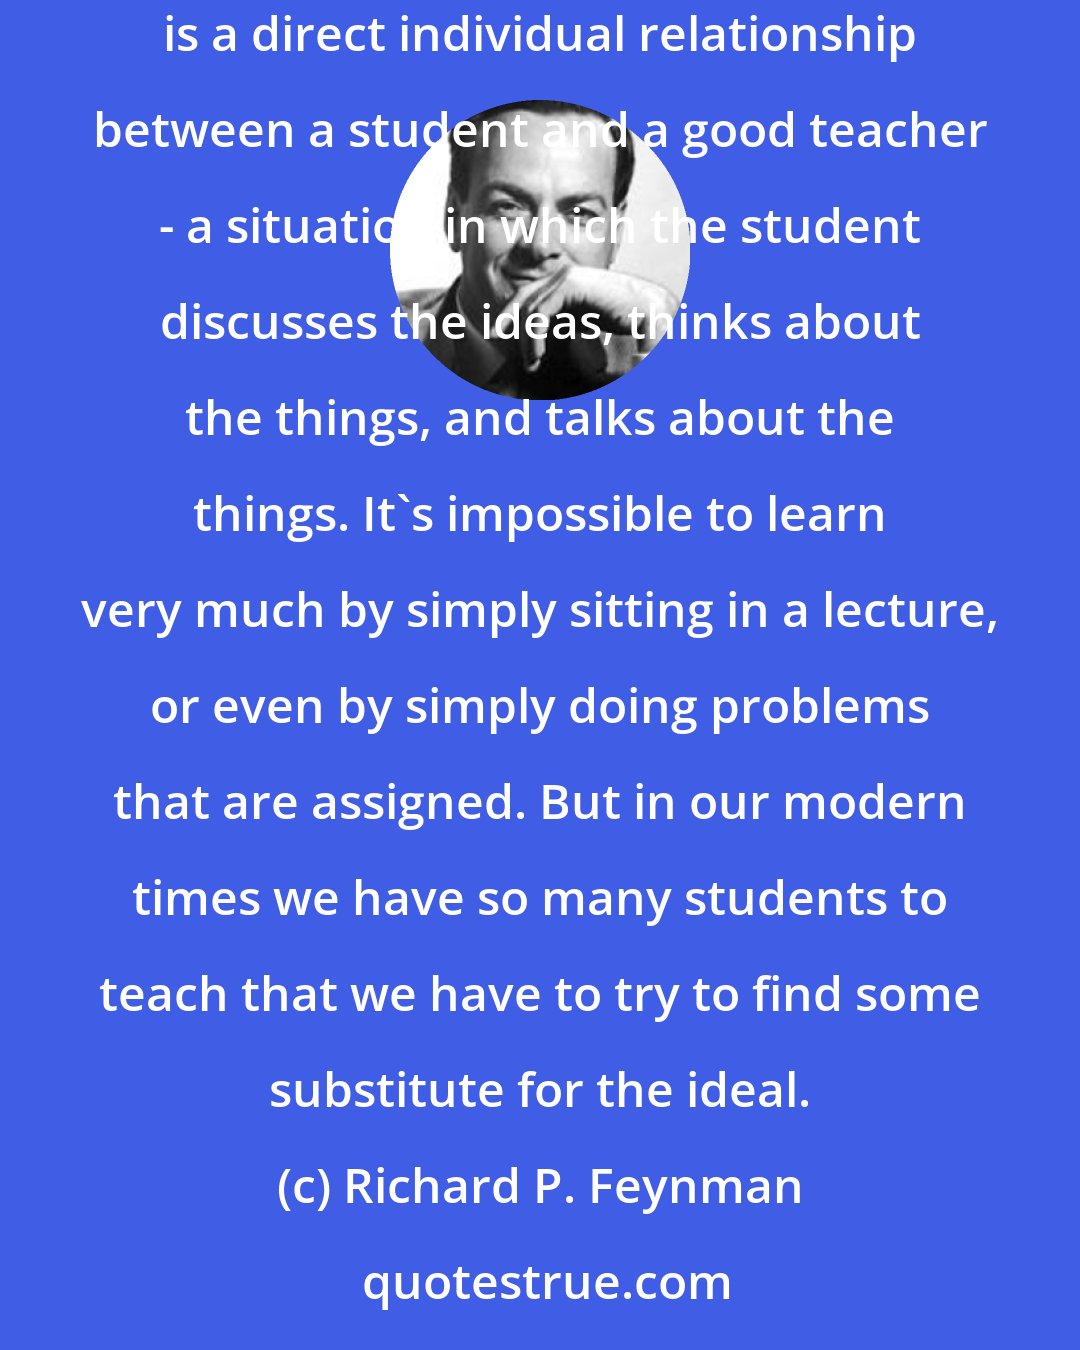 Richard P. Feynman: I think, however, that there isn't any solution to this problem of education other than to realize that the best teaching can be done only when there is a direct individual relationship between a student and a good teacher - a situation in which the student discusses the ideas, thinks about the things, and talks about the things. It's impossible to learn very much by simply sitting in a lecture, or even by simply doing problems that are assigned. But in our modern times we have so many students to teach that we have to try to find some substitute for the ideal.